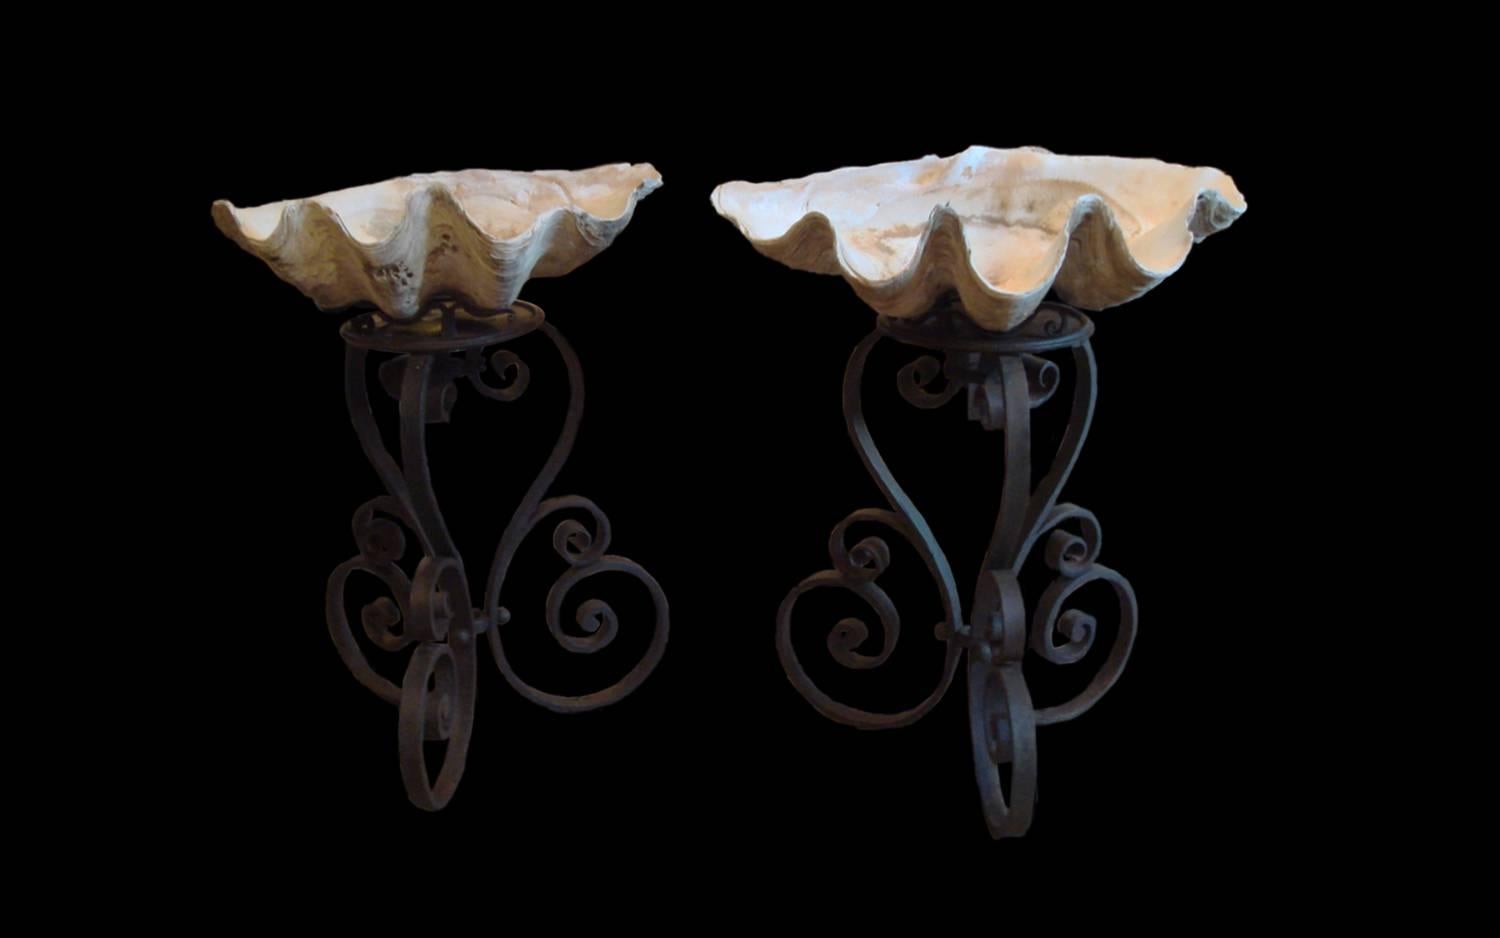 Pair of fabulous gigantic clam shells mounted on custom hand-forged iron bases. The bases date approximately from 1890's. The date of the clam shells is difficult to determine.

The metal stands are 32.5" in height.
Clam shell #1 H44" x